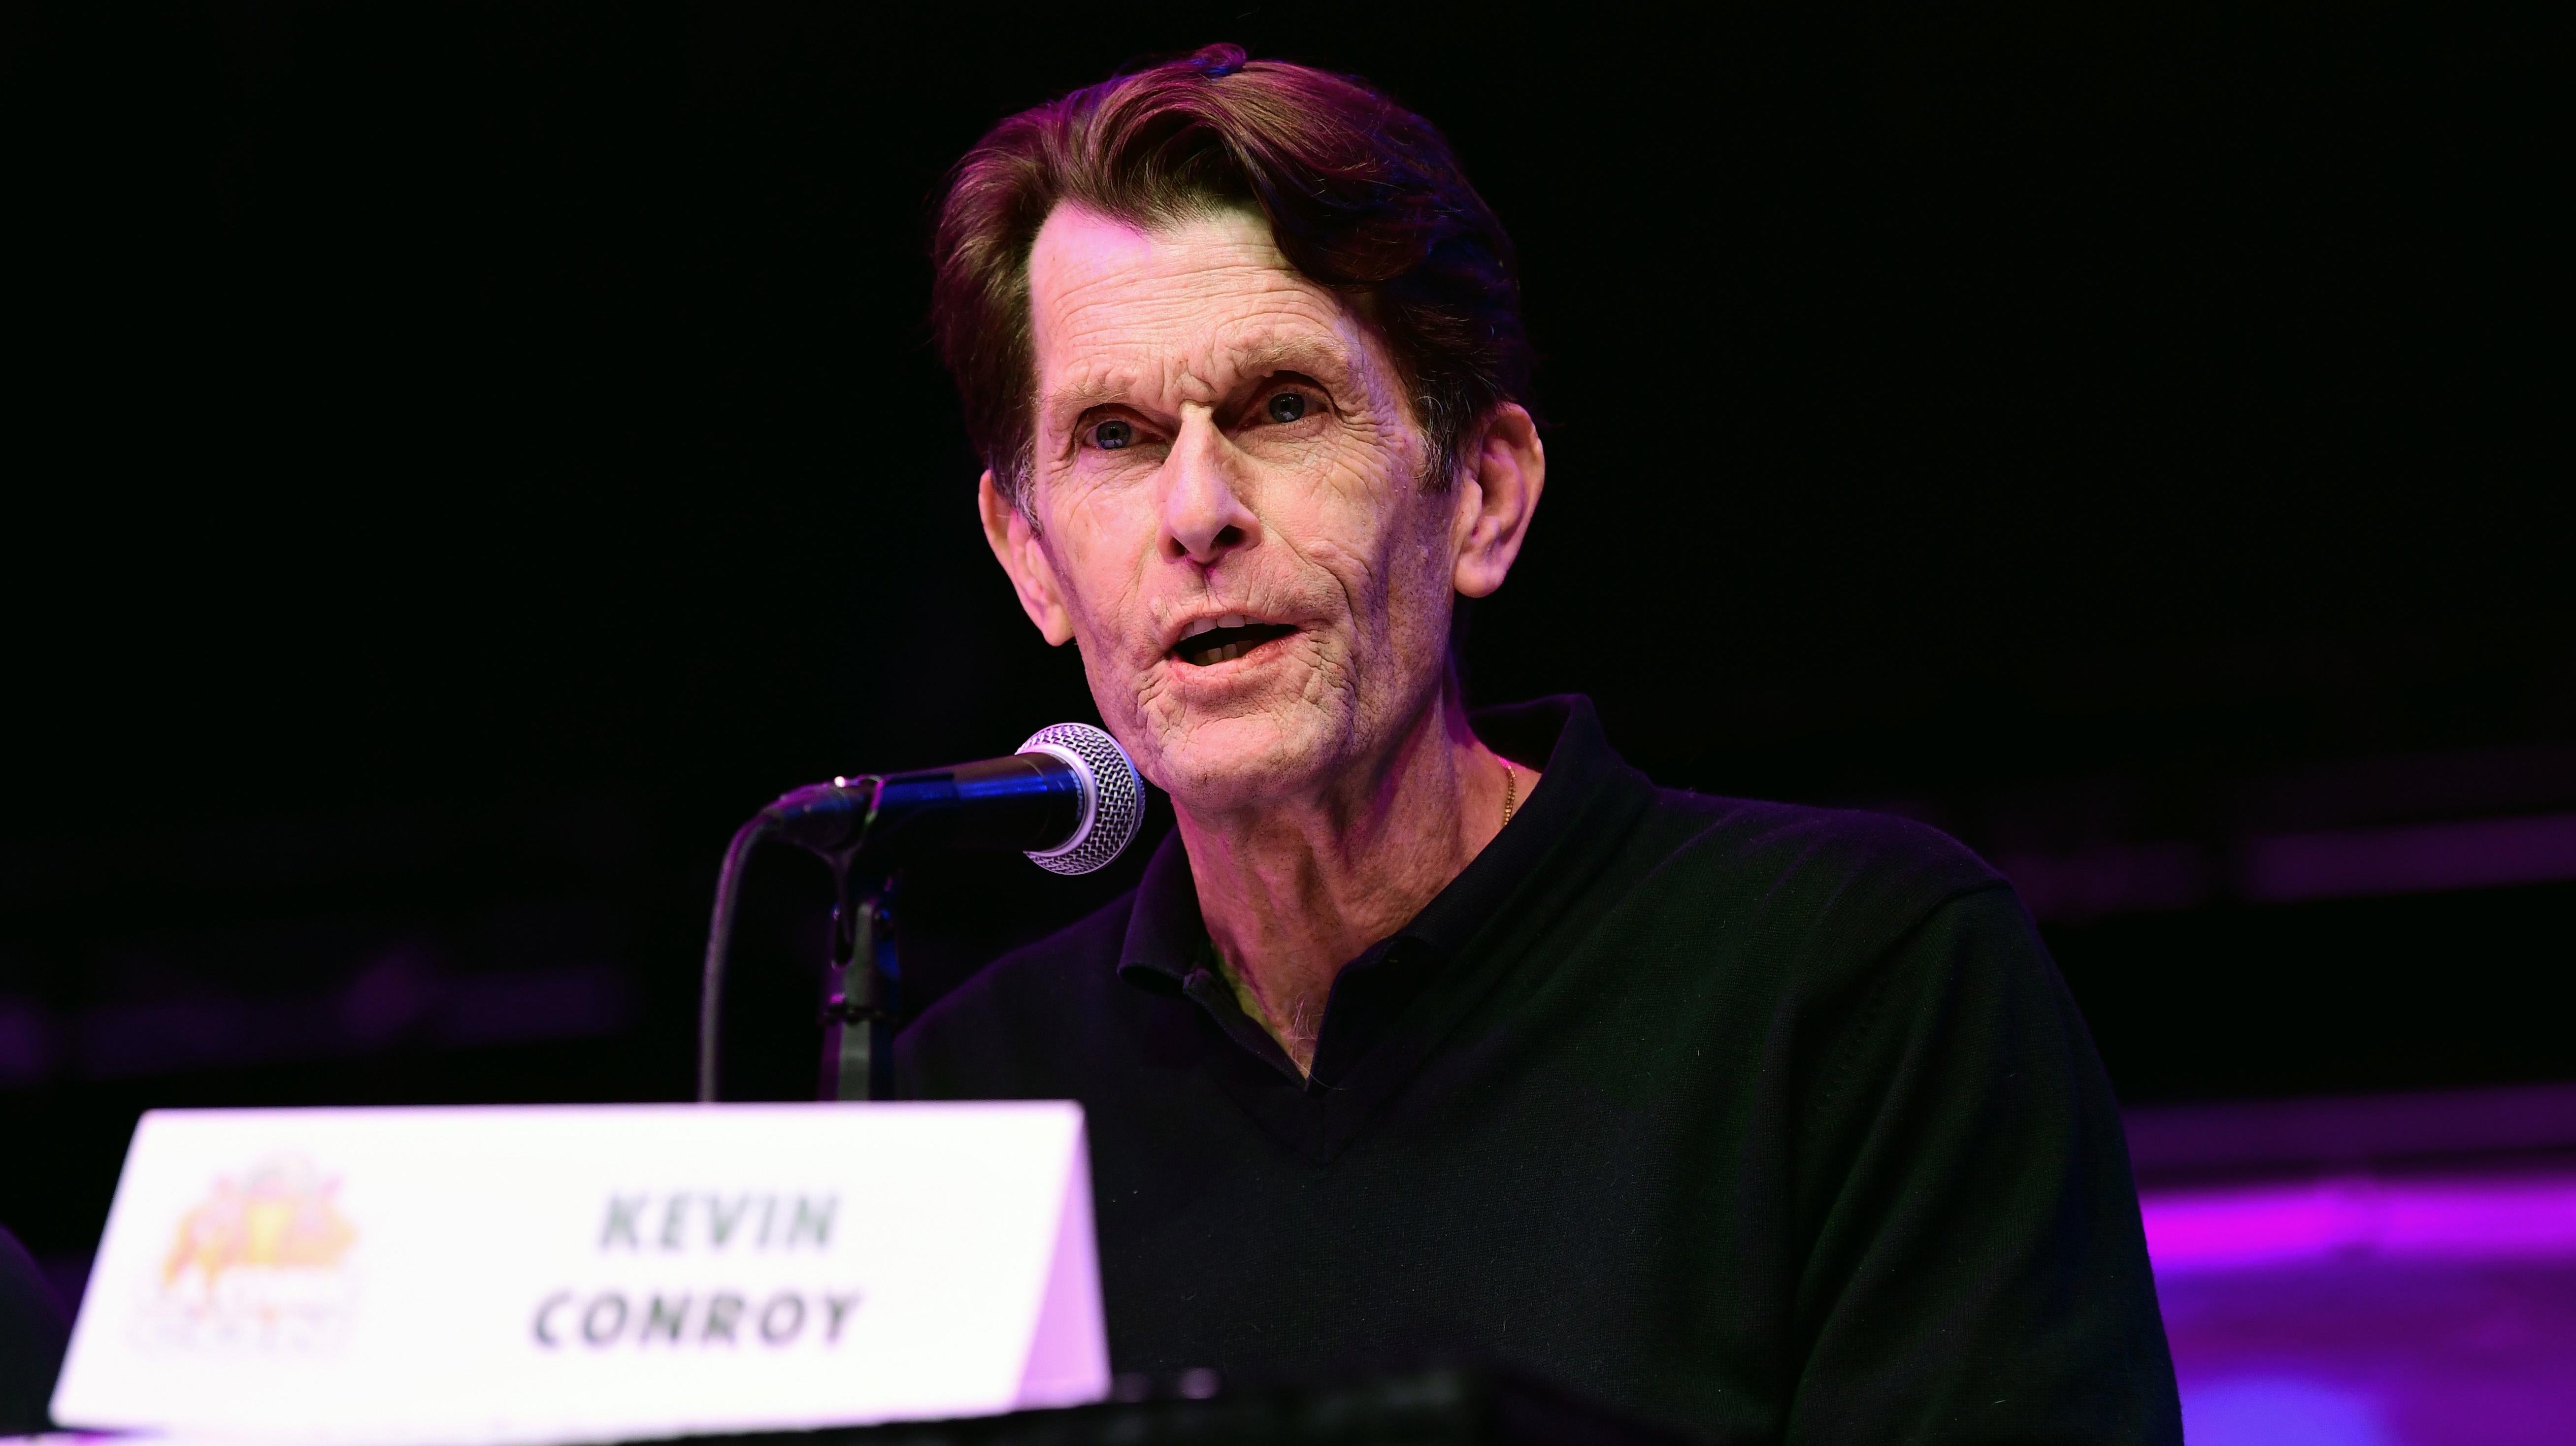 Kevin Conroy speaks during 2021 Los Angeles Comic Con at Los Angeles Convention Centre on December 04, 2021 in Los Angeles, California. (Photo: Chelsea Guglielmino, Getty Images)